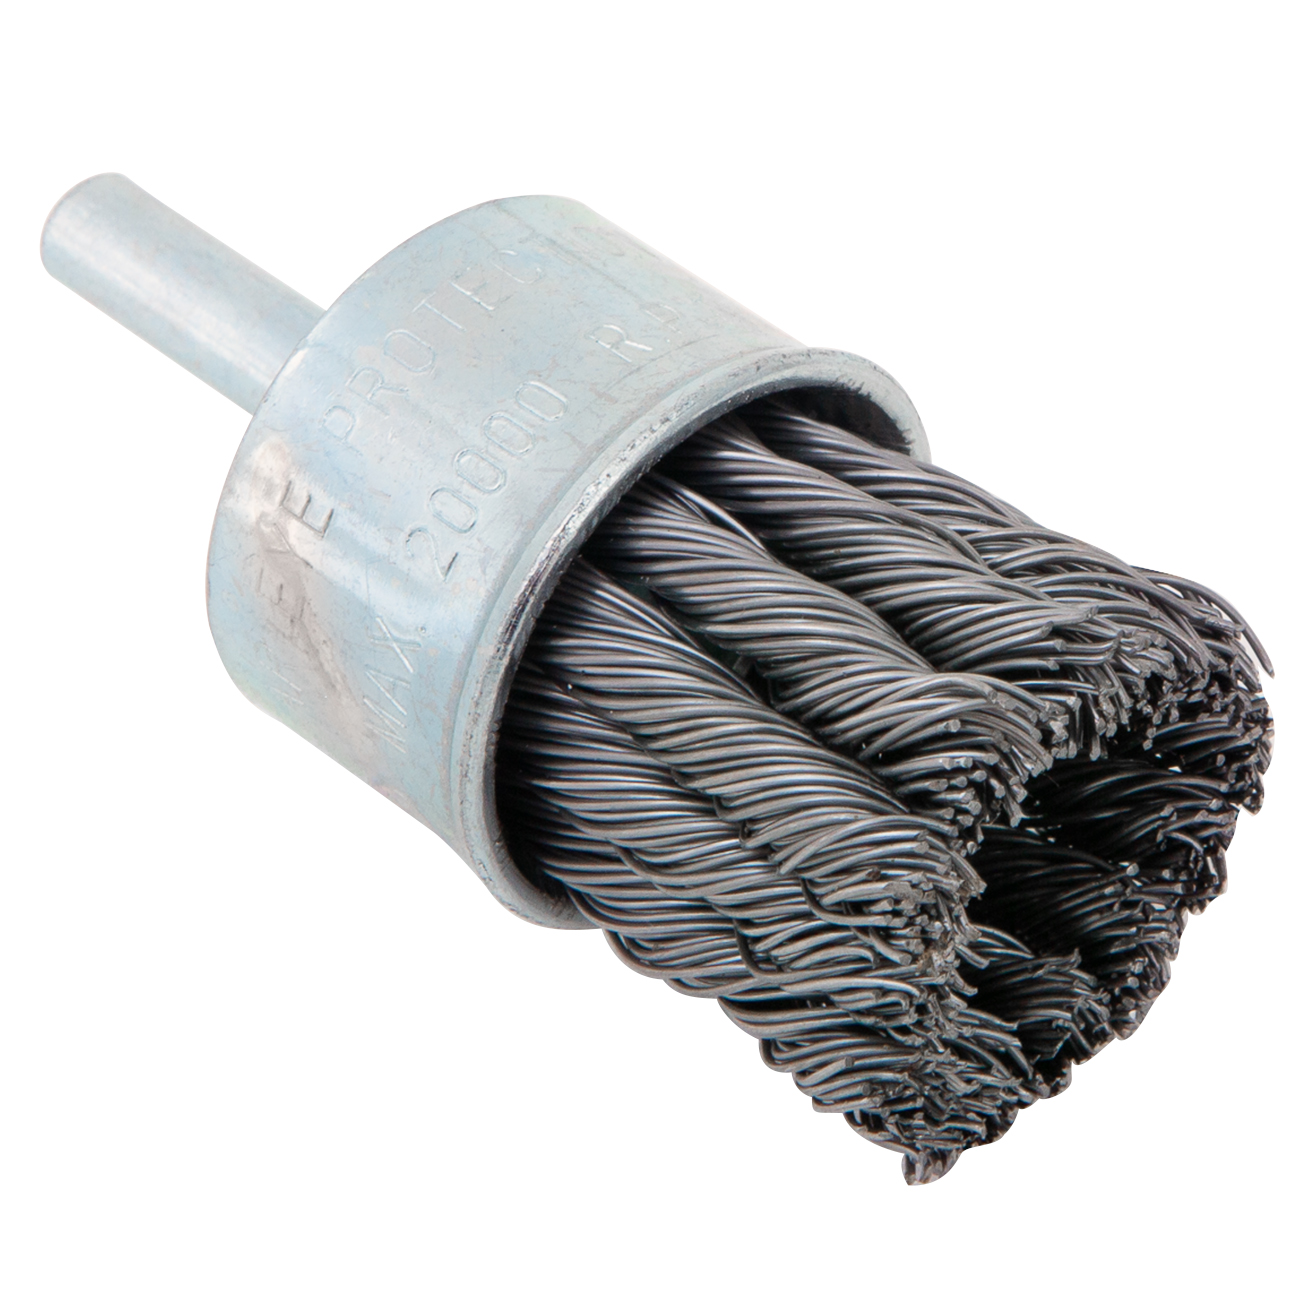 Shark - Knotted Wire Cup Brush - Double Row -6 x 5/8-11NC .014 Wire.